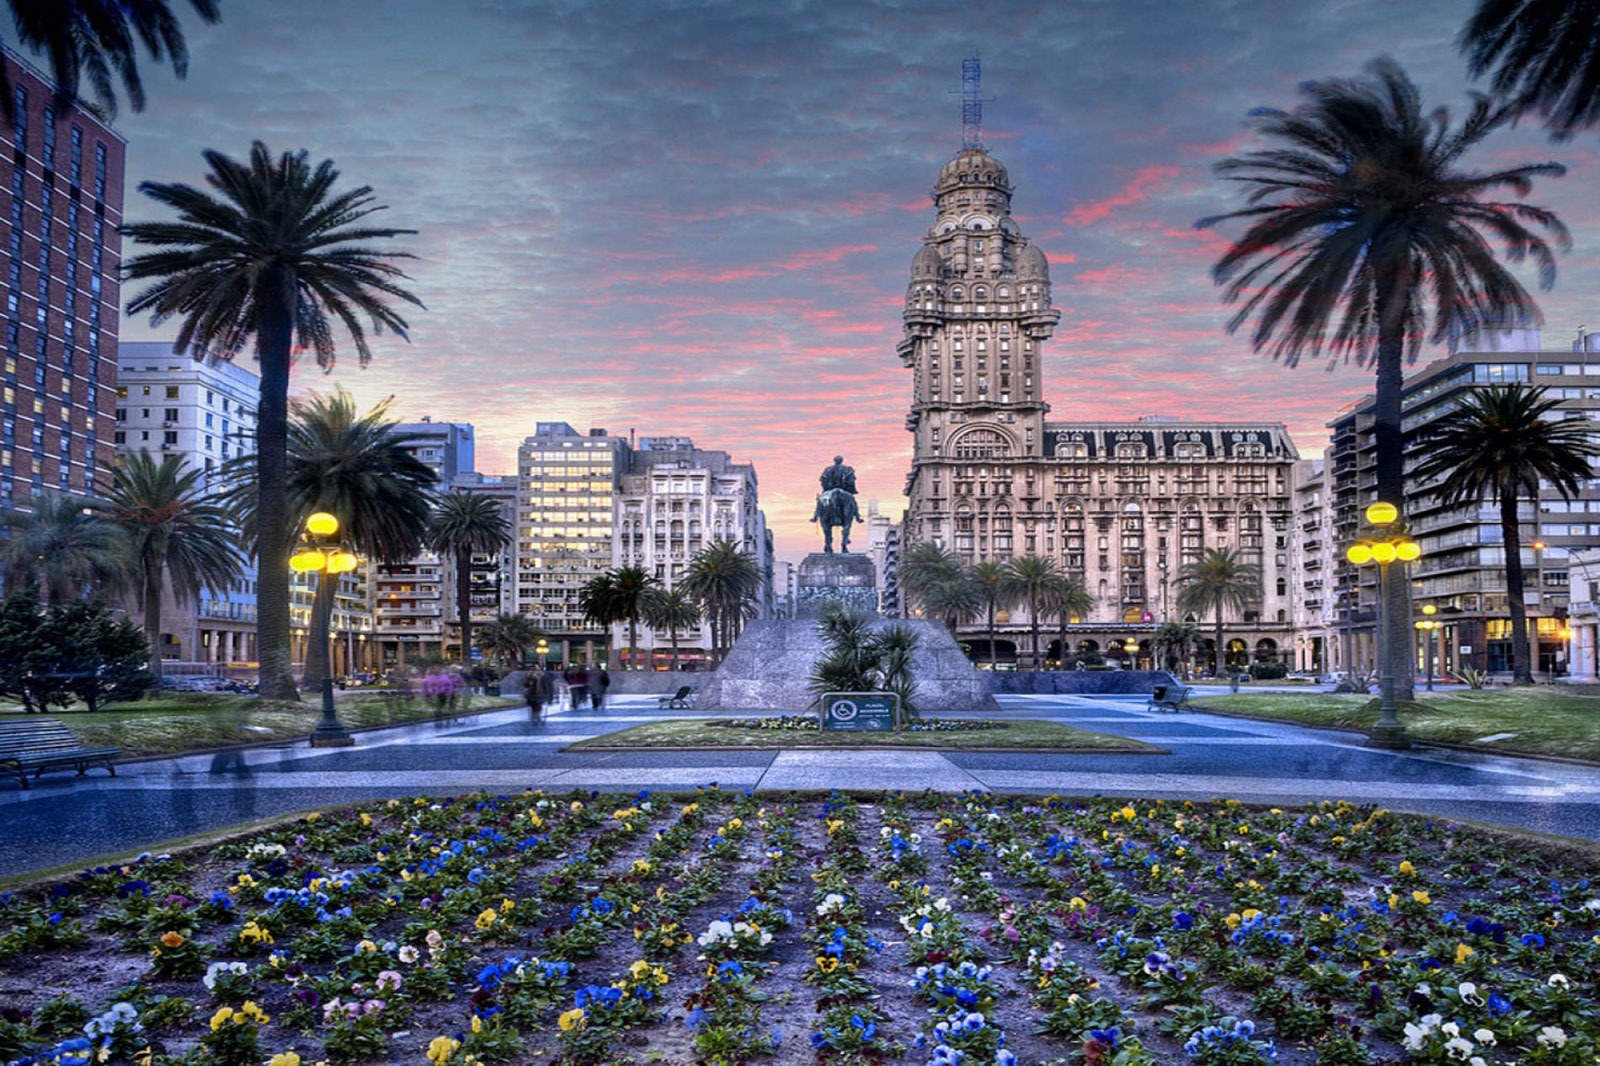 This 25-Question General Knowledge Quiz Will Determine If You Know a Little or a Lot Plaza Independencia, Montevideo, Uruguay